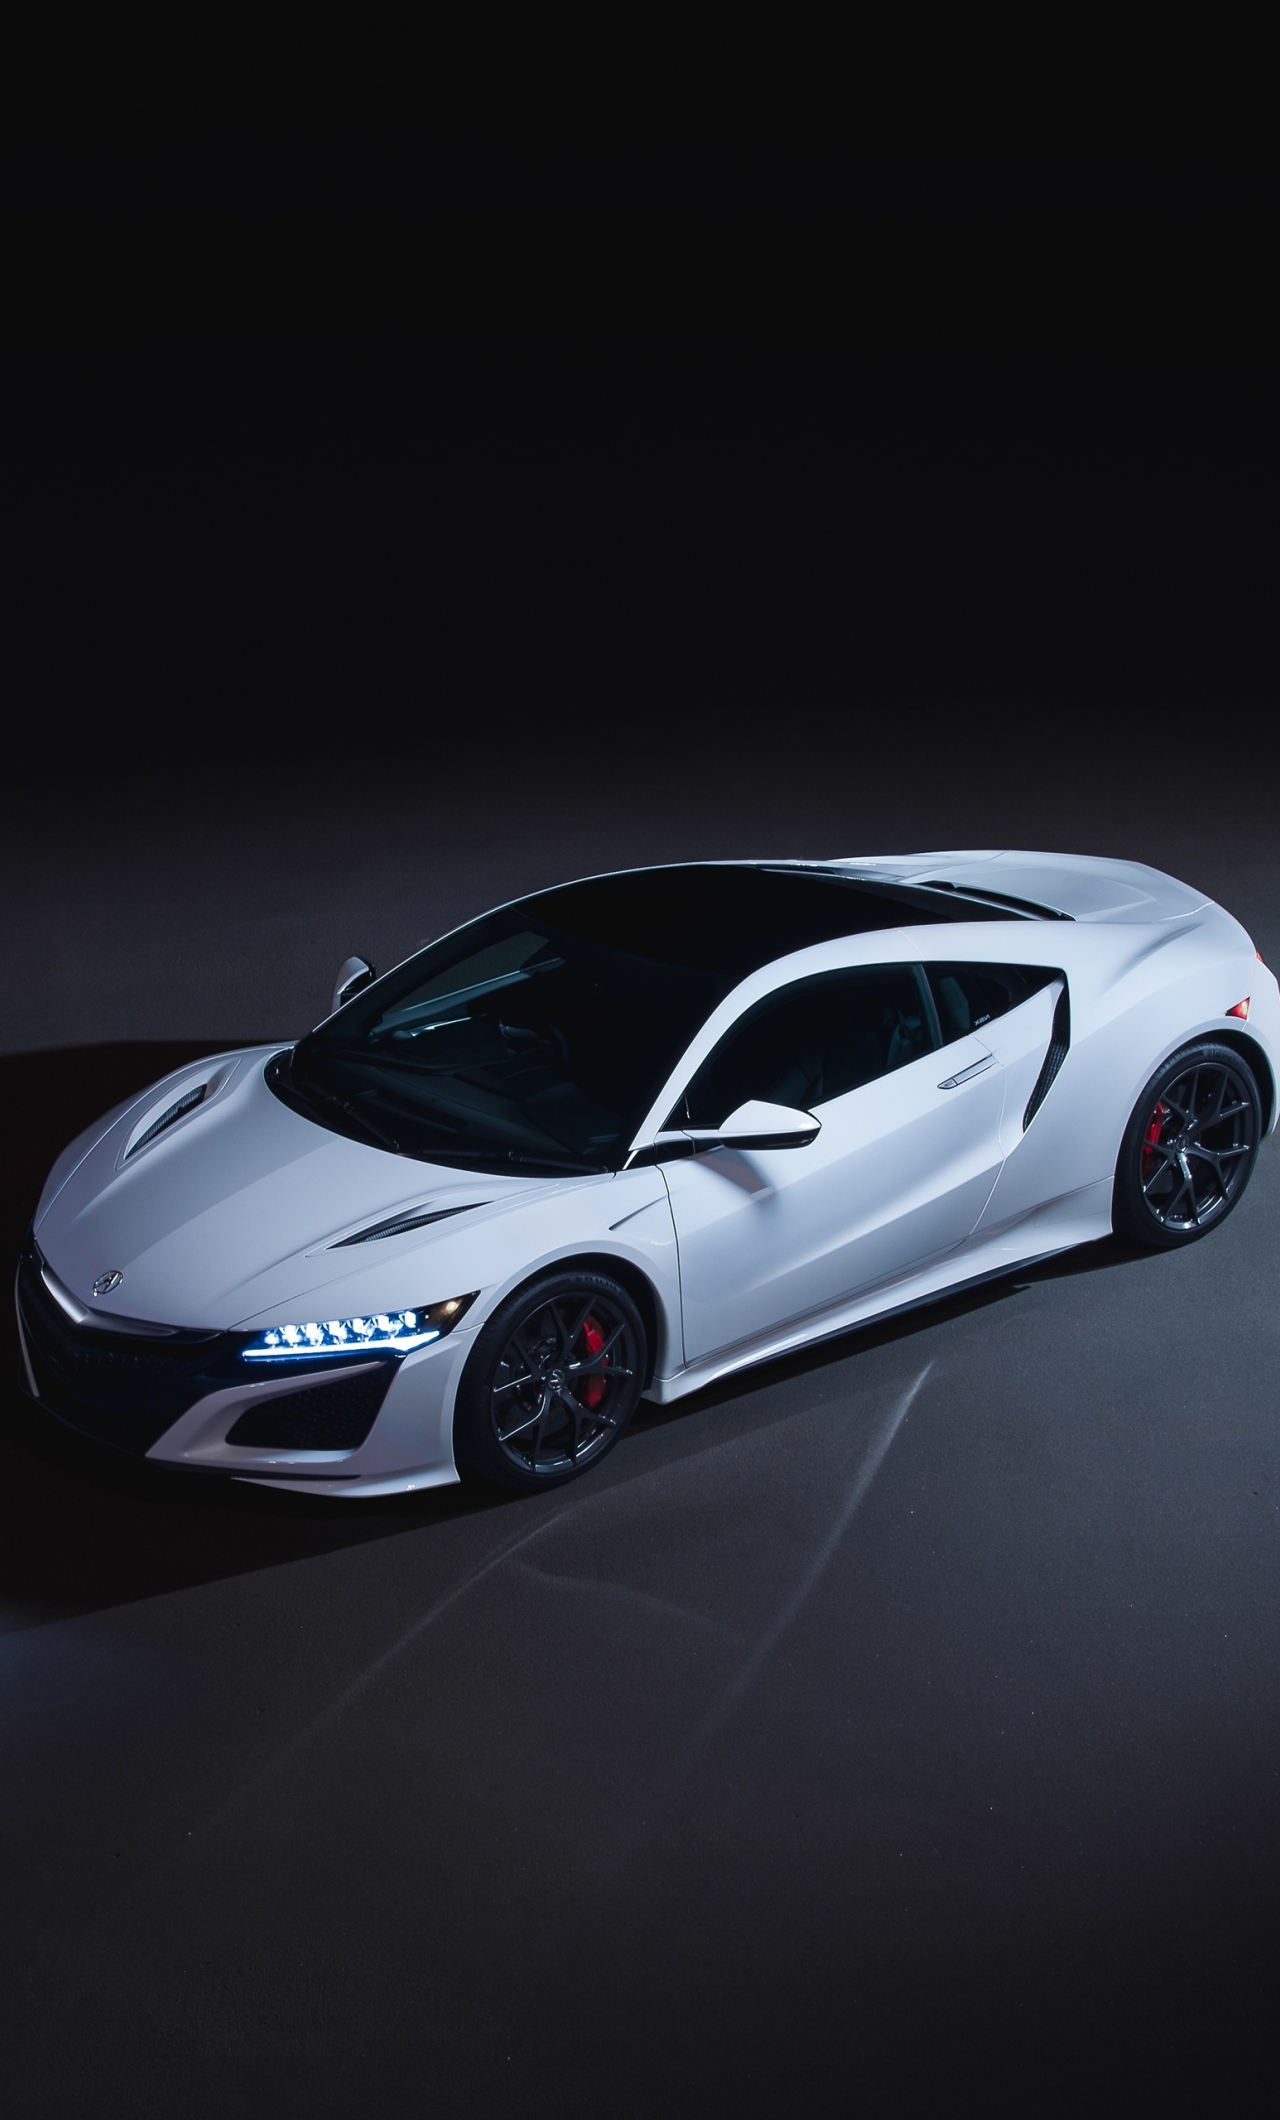 Download 1280x2120 Wallpaper Acura Nsx White Sports Car 2019 Iphone 6 Plus 1280x2120 Hd Image Background 18587